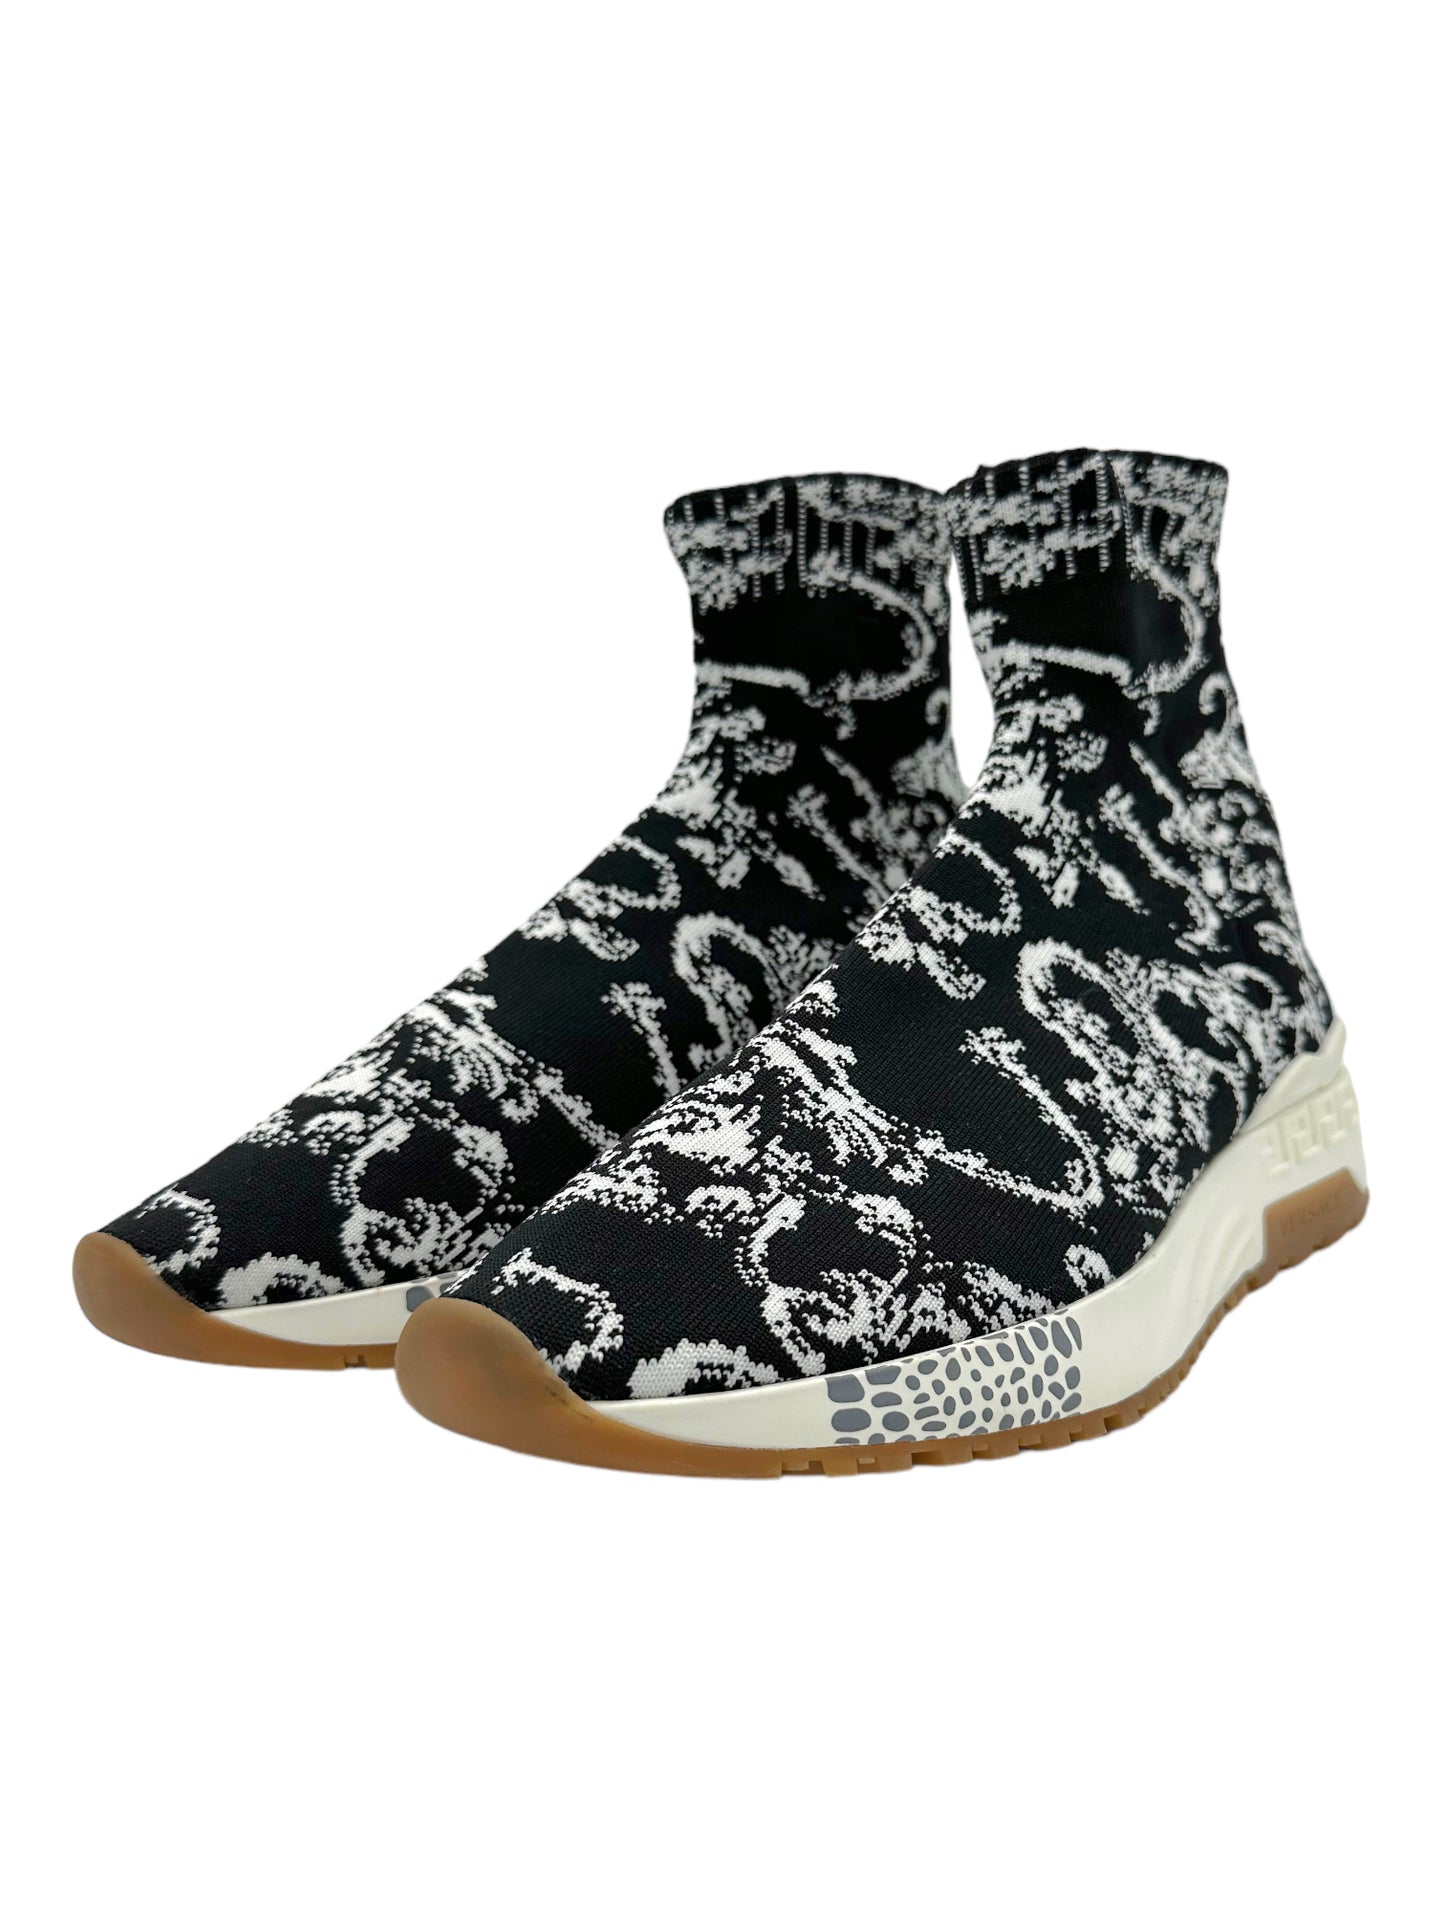 Versace Black & White Abstract Pattern Knit Sock Runners - Genuine Design Luxury Consignment. New & Pre-Owned Clothing, Shoes, & Accessories. Calgary, Canada